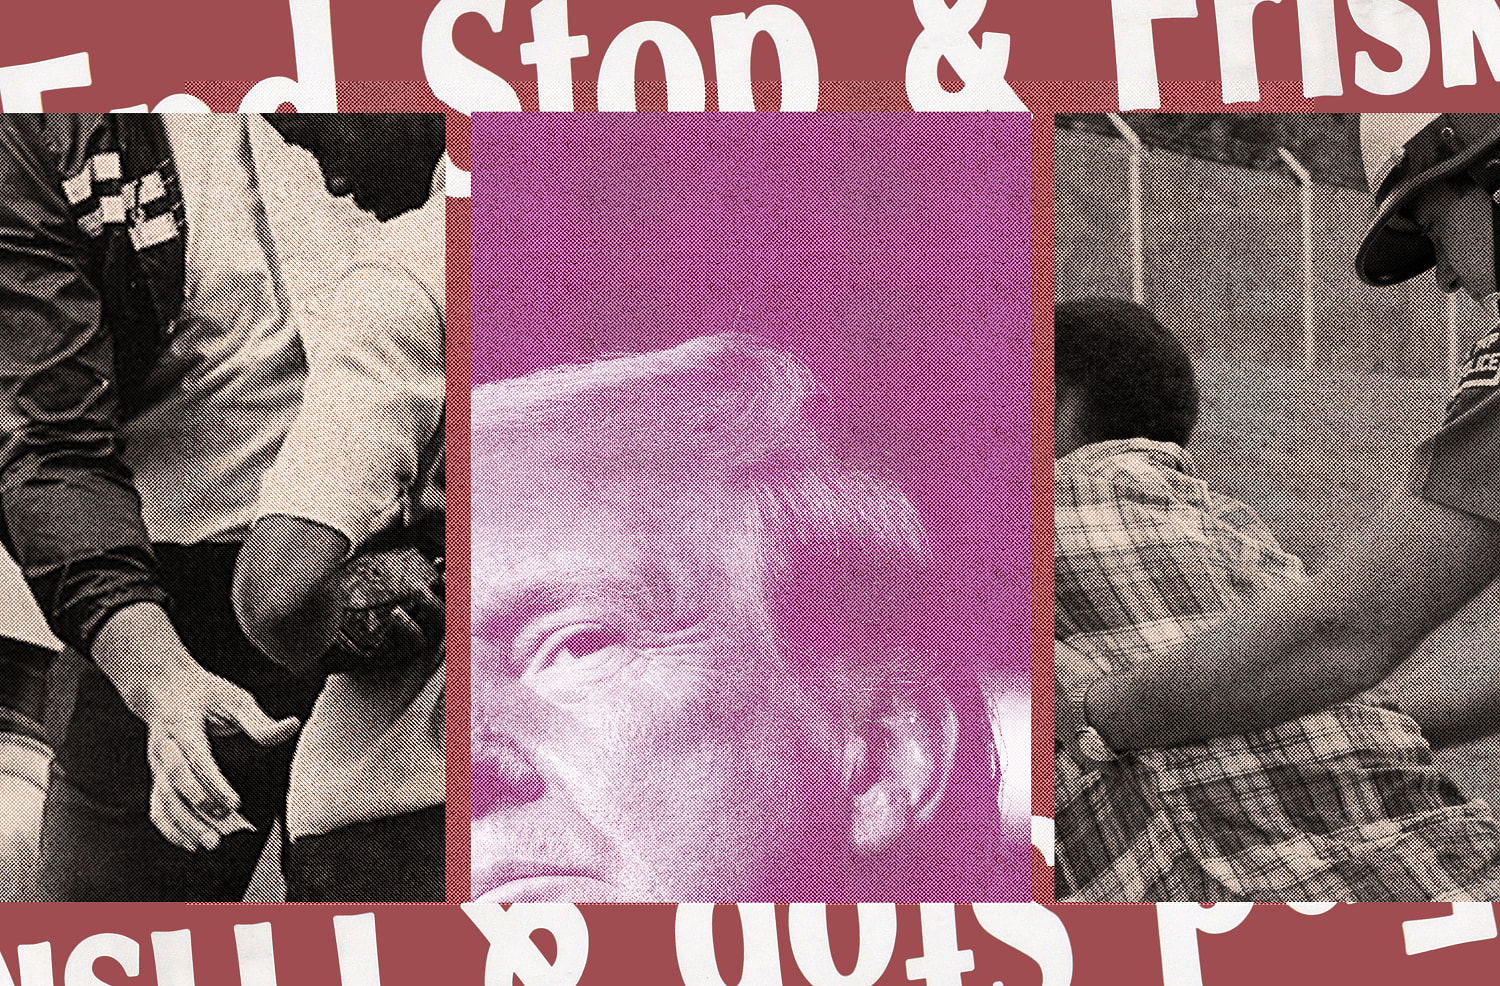 Trump’s pledge to reinstate ‘stop and frisk’ puts some of the Black voters he’s courting on edge